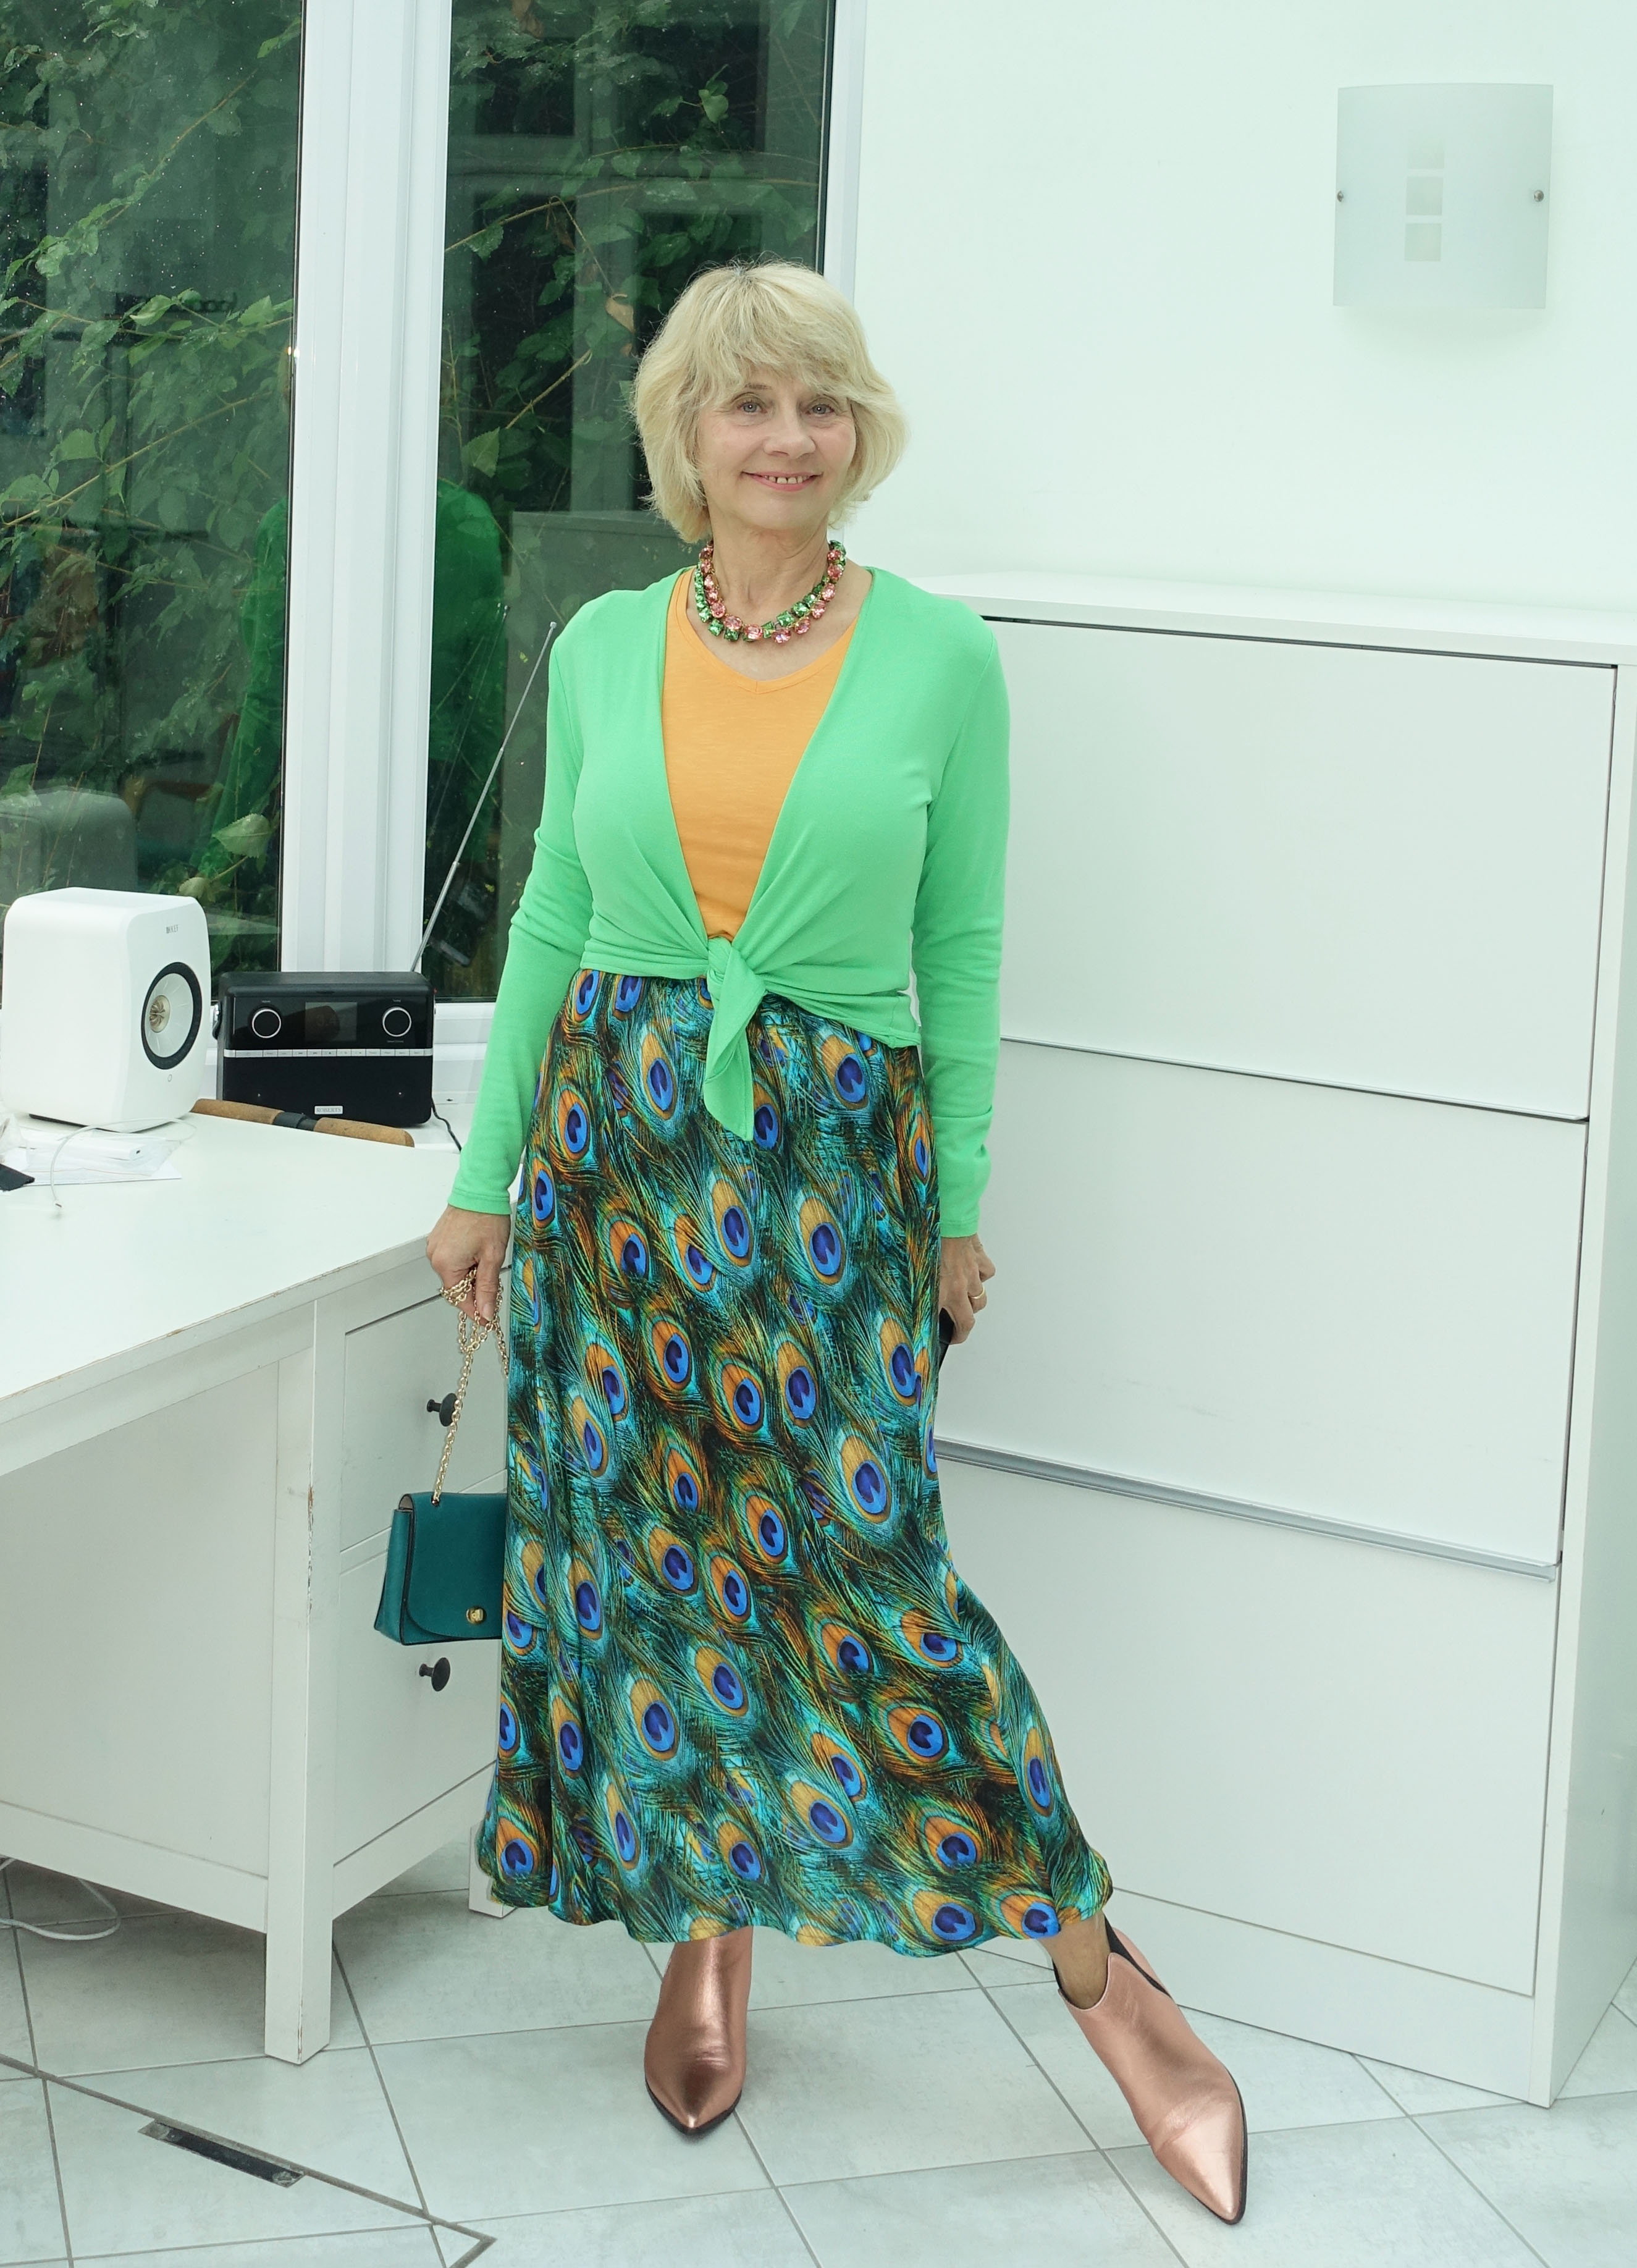 Gail Hanlon from Is This Mutton in peacock patterned skirt, green short tie wrap, bright apricot top and rose gold ankle boots.